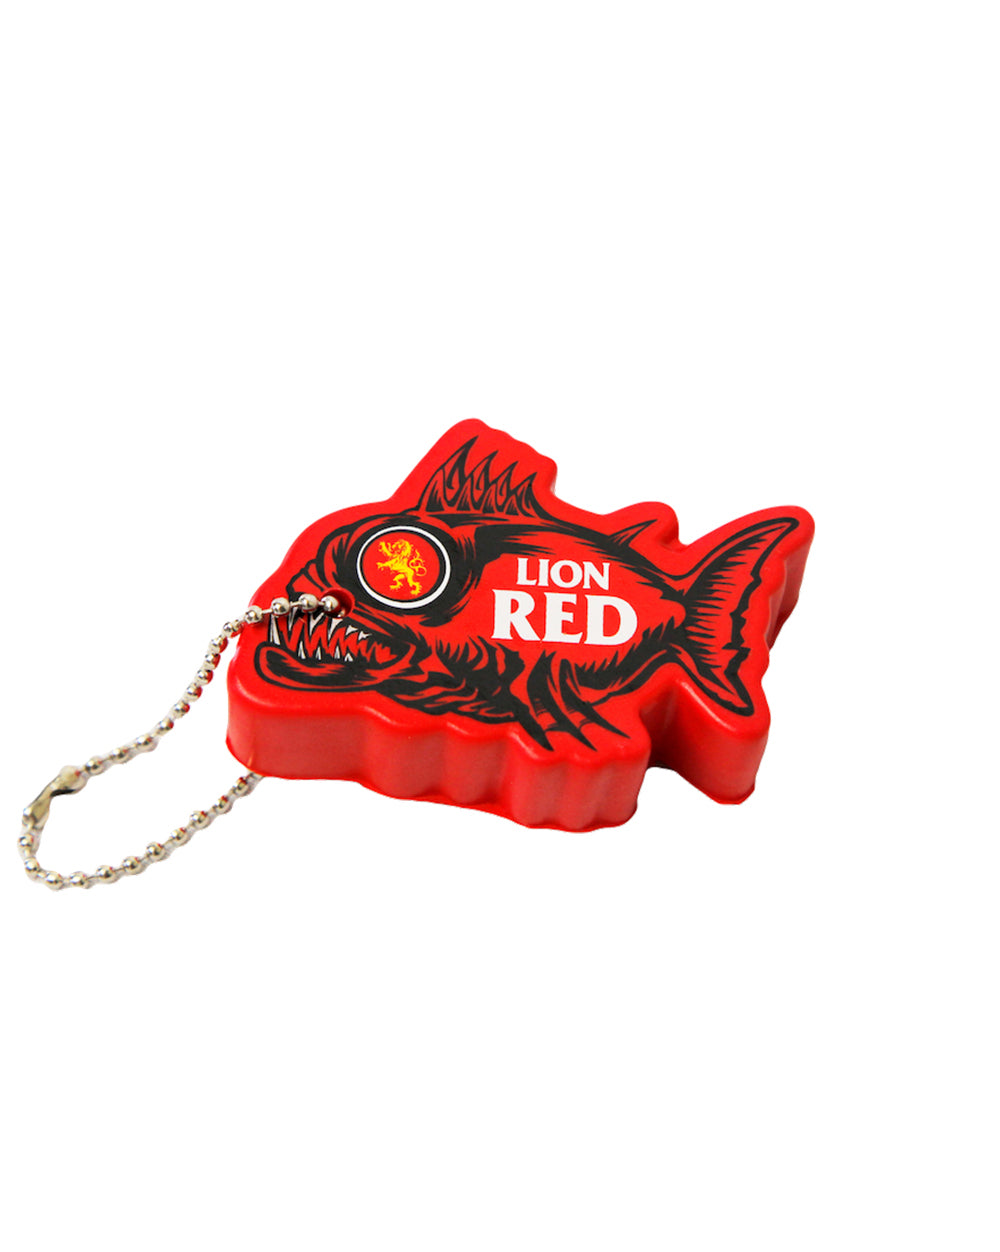 Lion Red Angry Fish Keyring -  Beer Gear Apparel & Merchandise - Speights - Lion Red - VB - Tokyo Dy merch